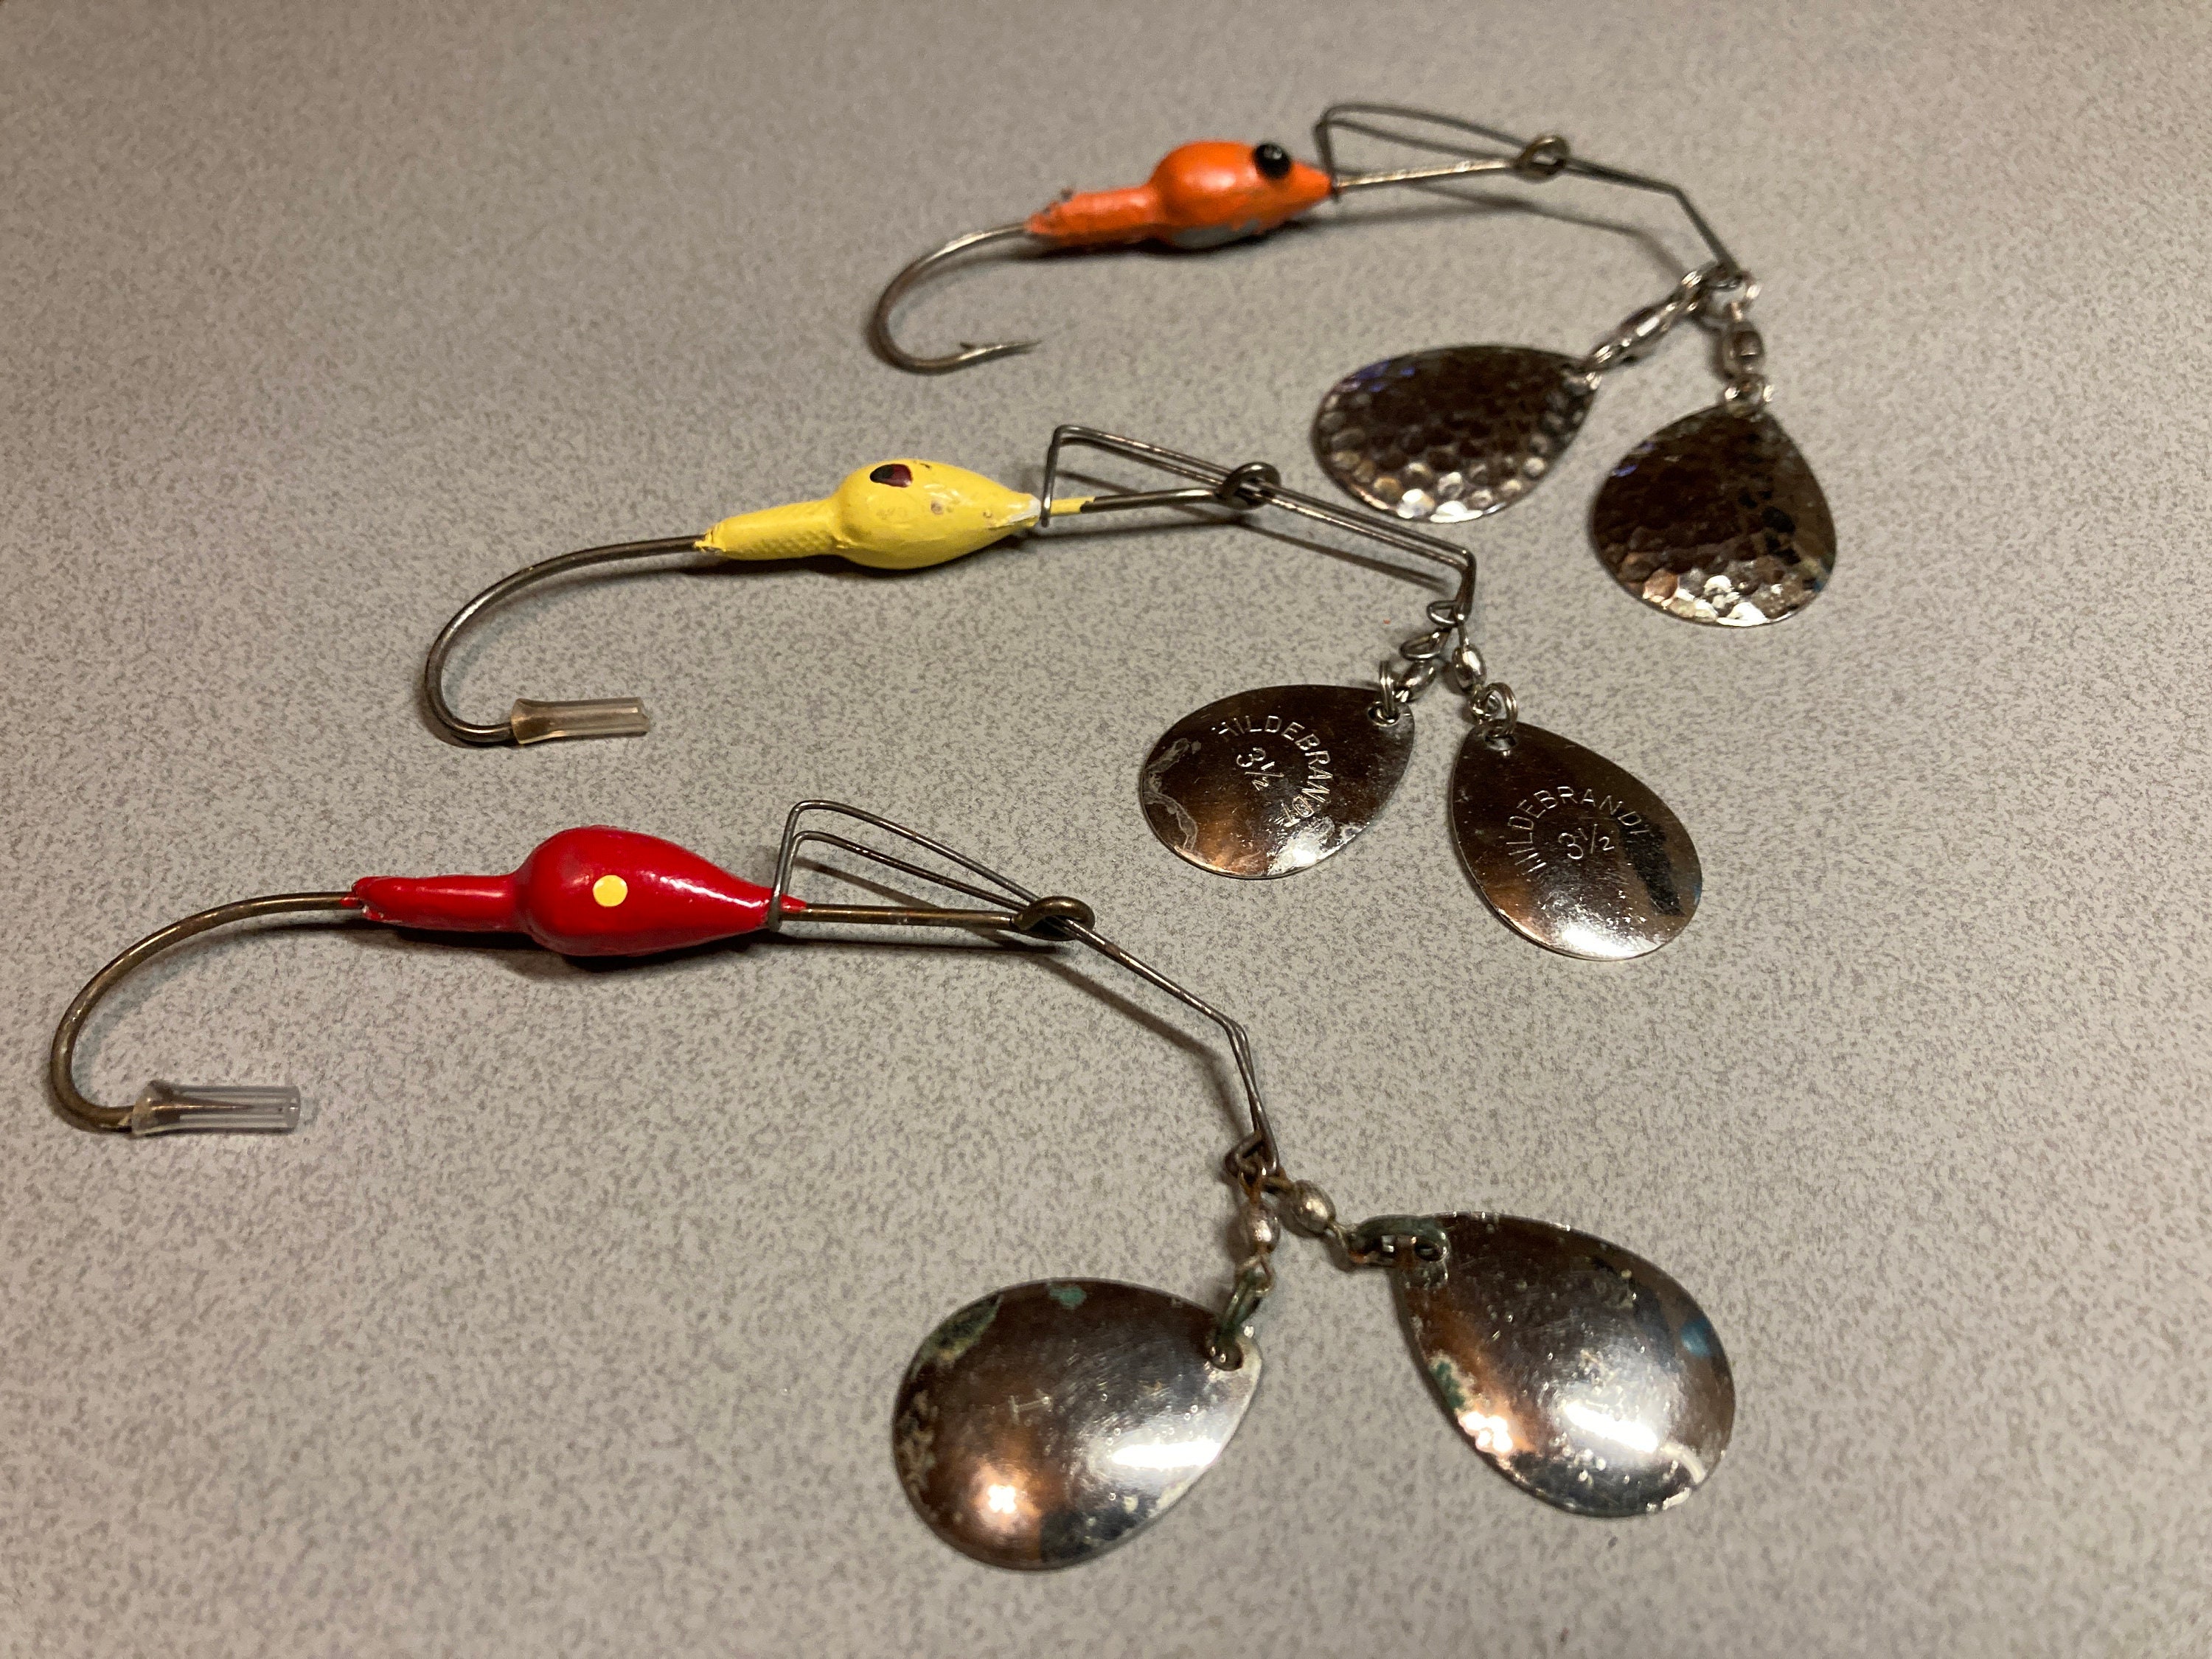 Scarce Vintage Fishing Lures. Tandem Bladed Spinner Baits With Great Colors  on Leaded Weight. Retractable Twin Spin Blades. Great Displays 